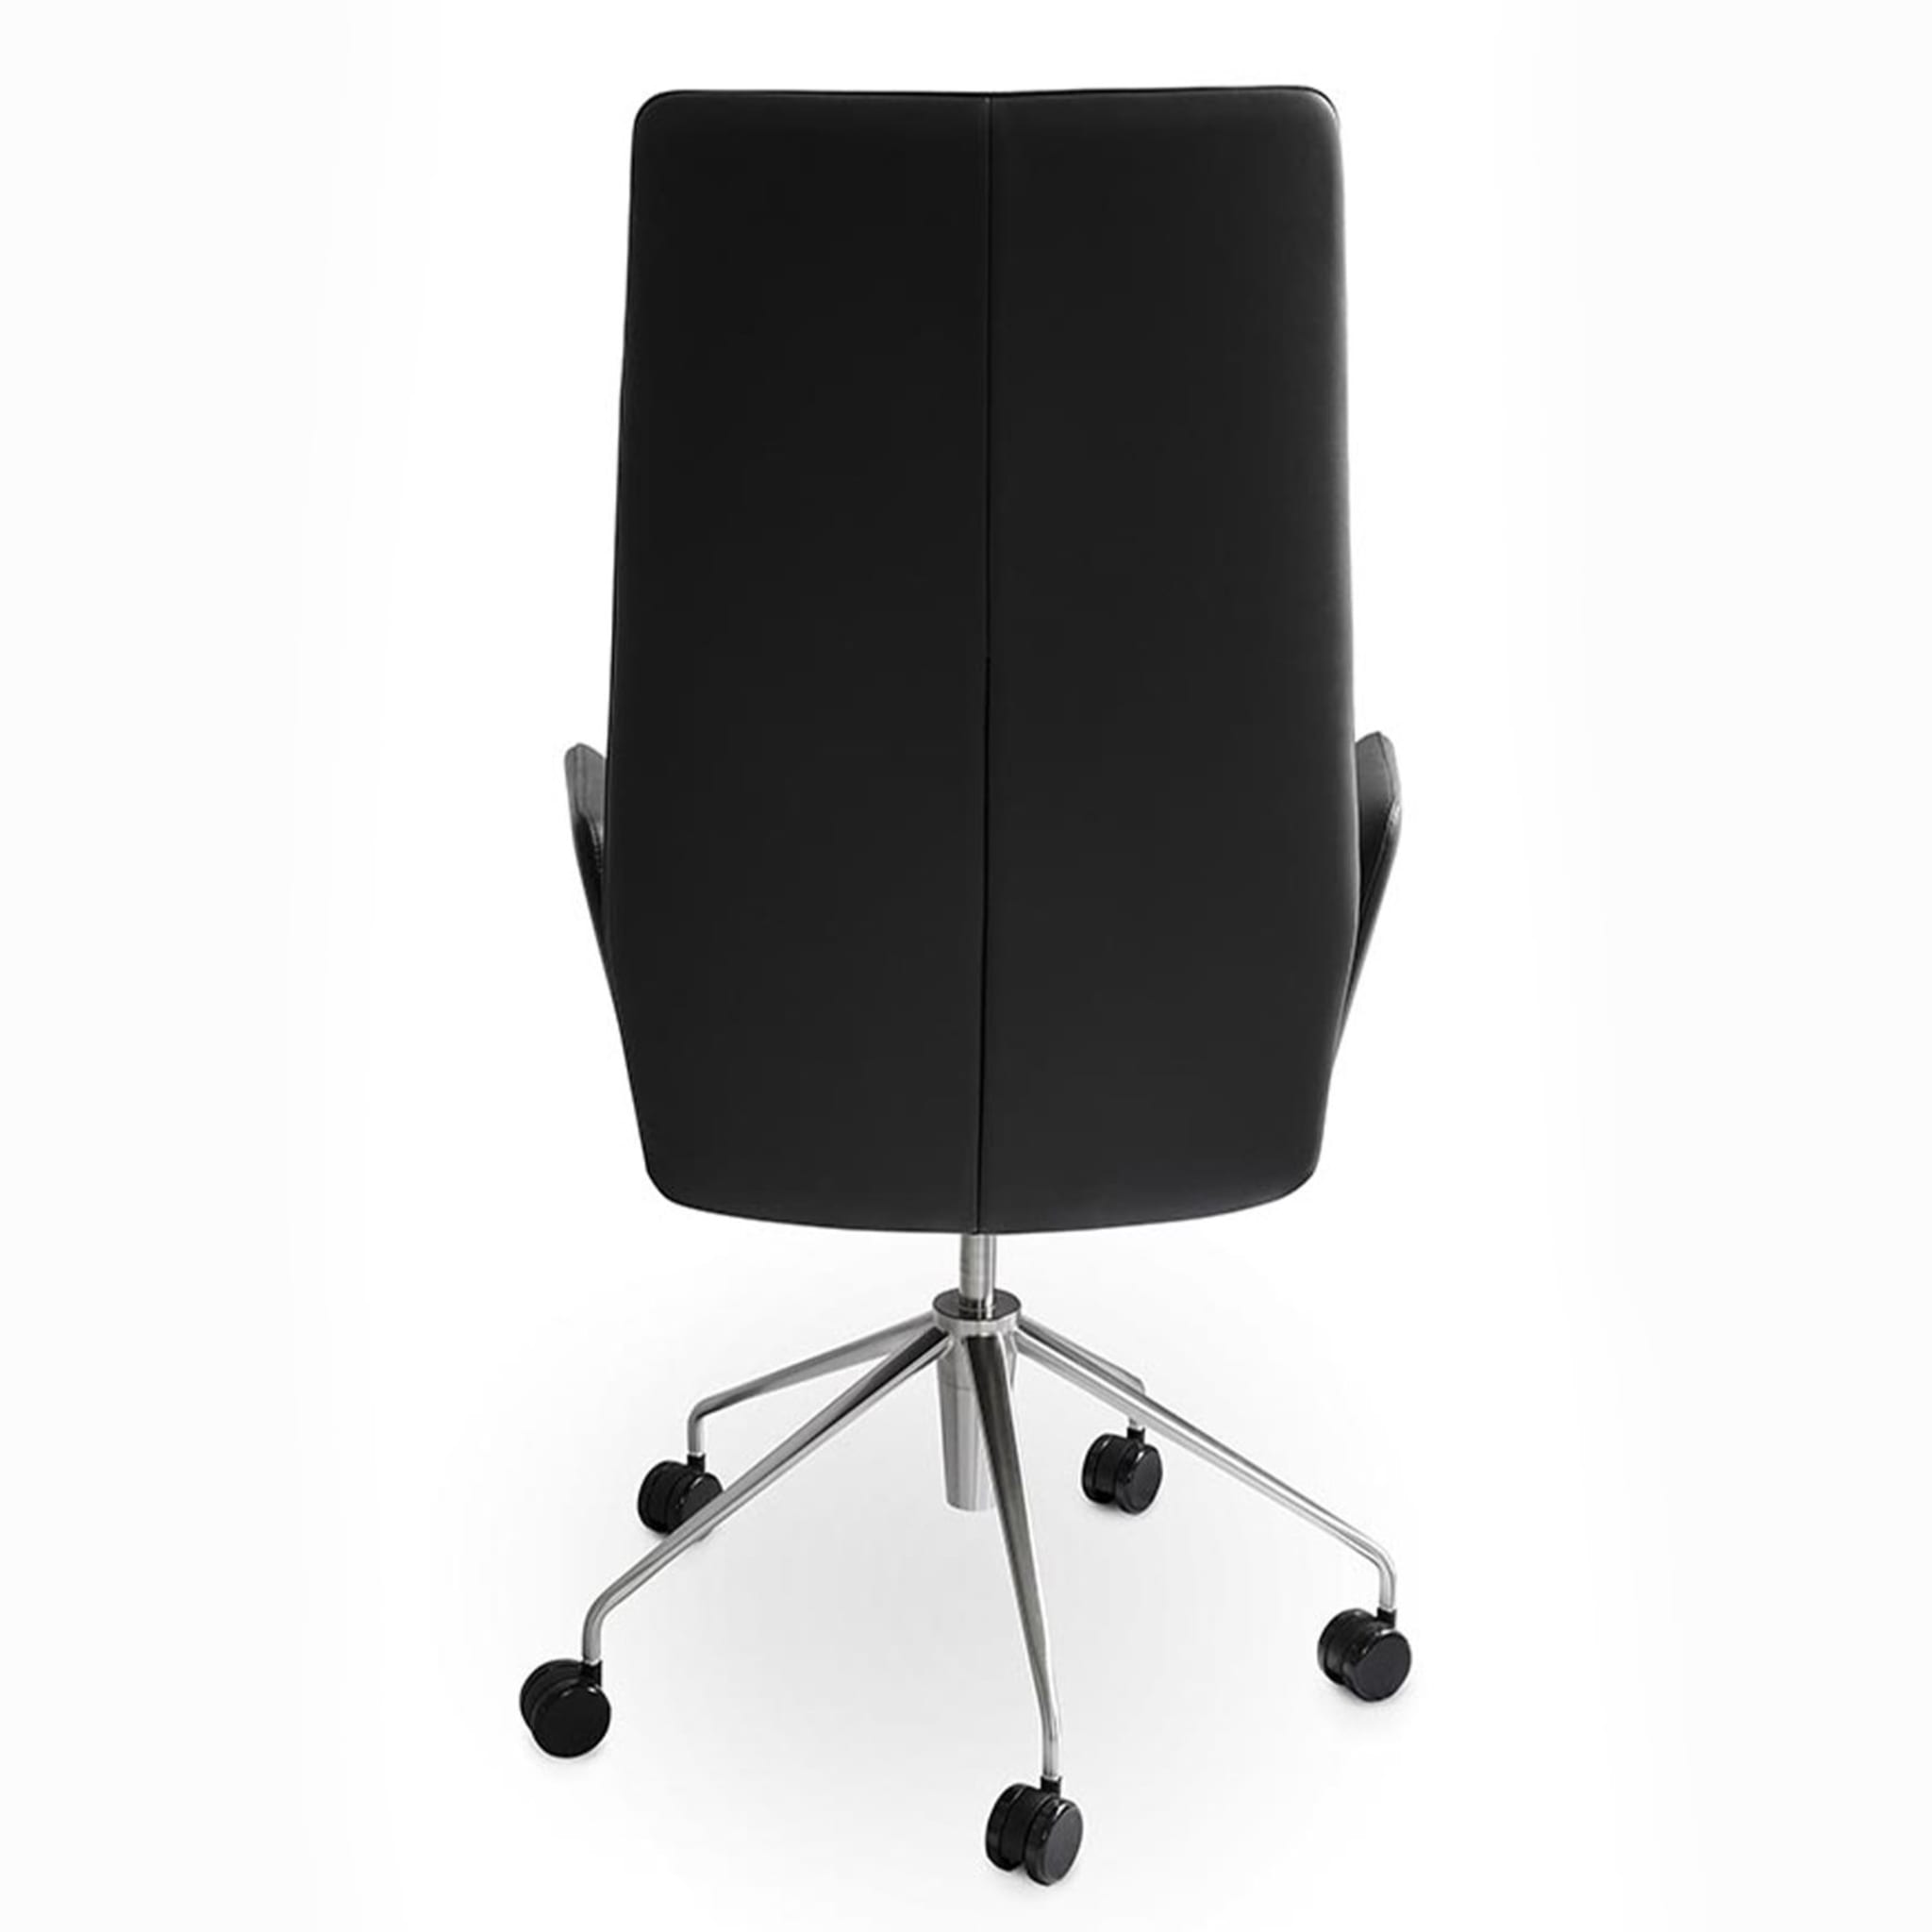 Vela Tall Black Leather Swivel Armchair by Lievore Altherr Molina - Alternative view 2